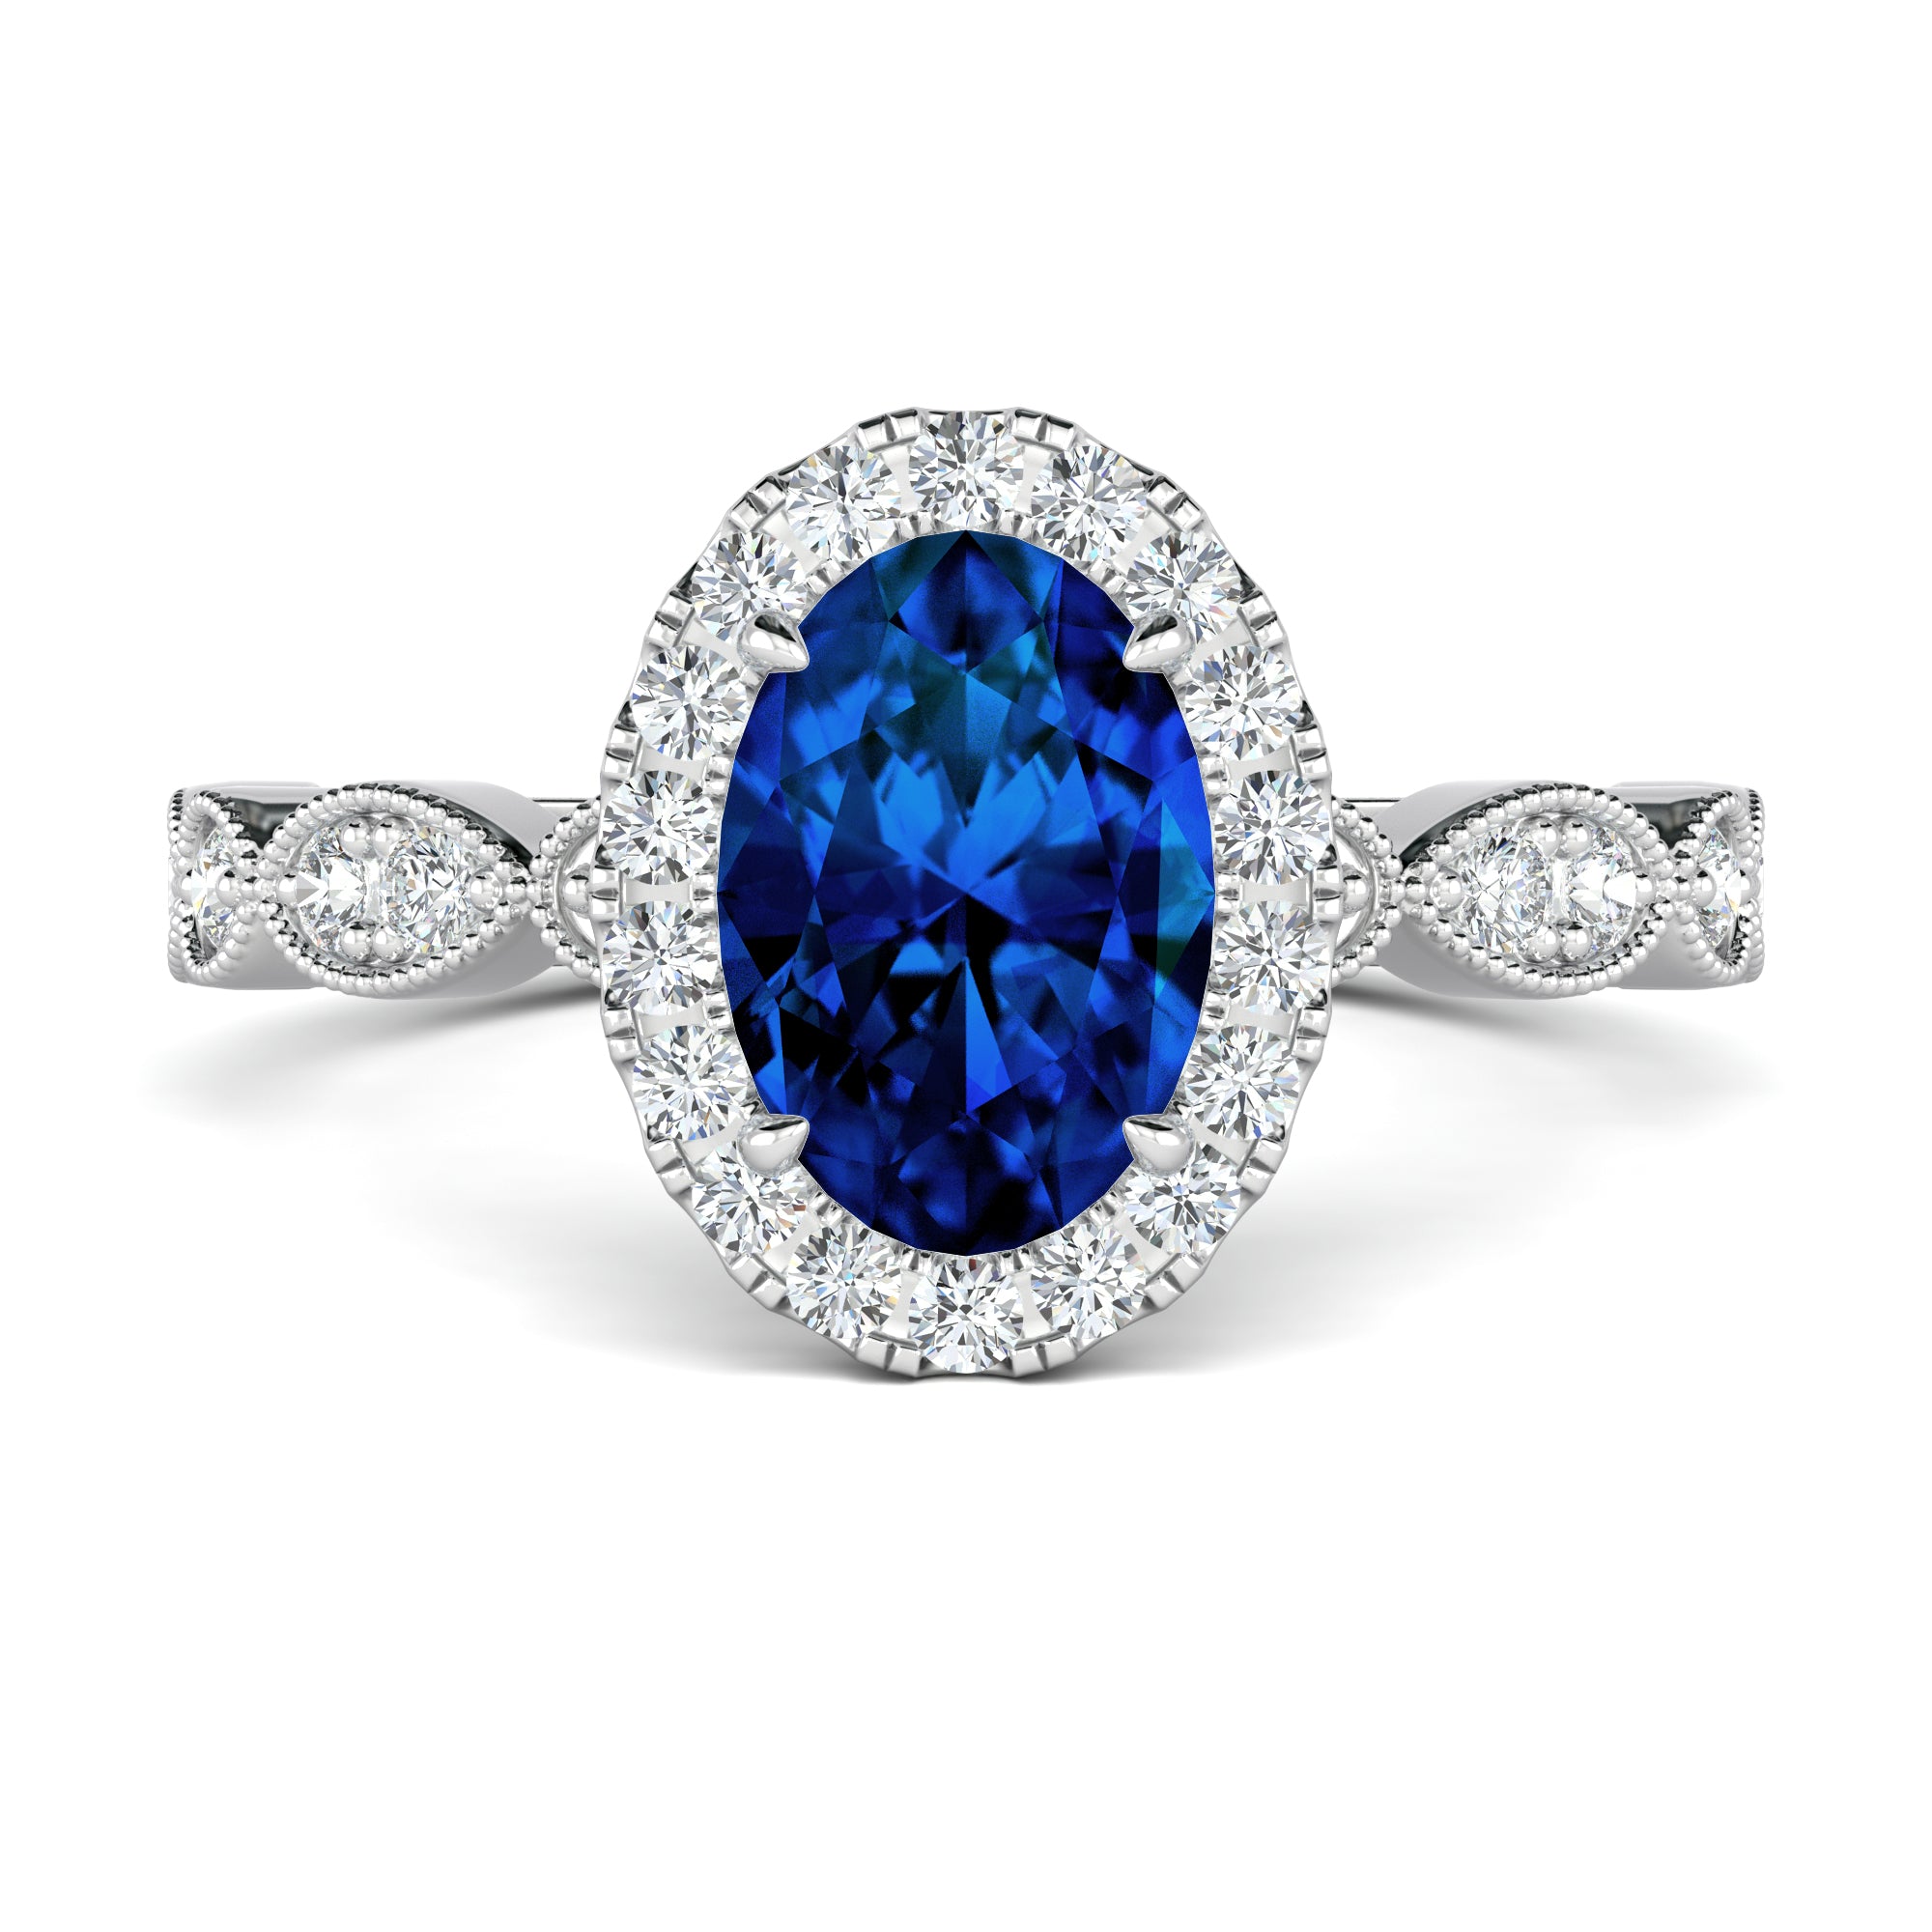 Oval sapphire halo engagement ring